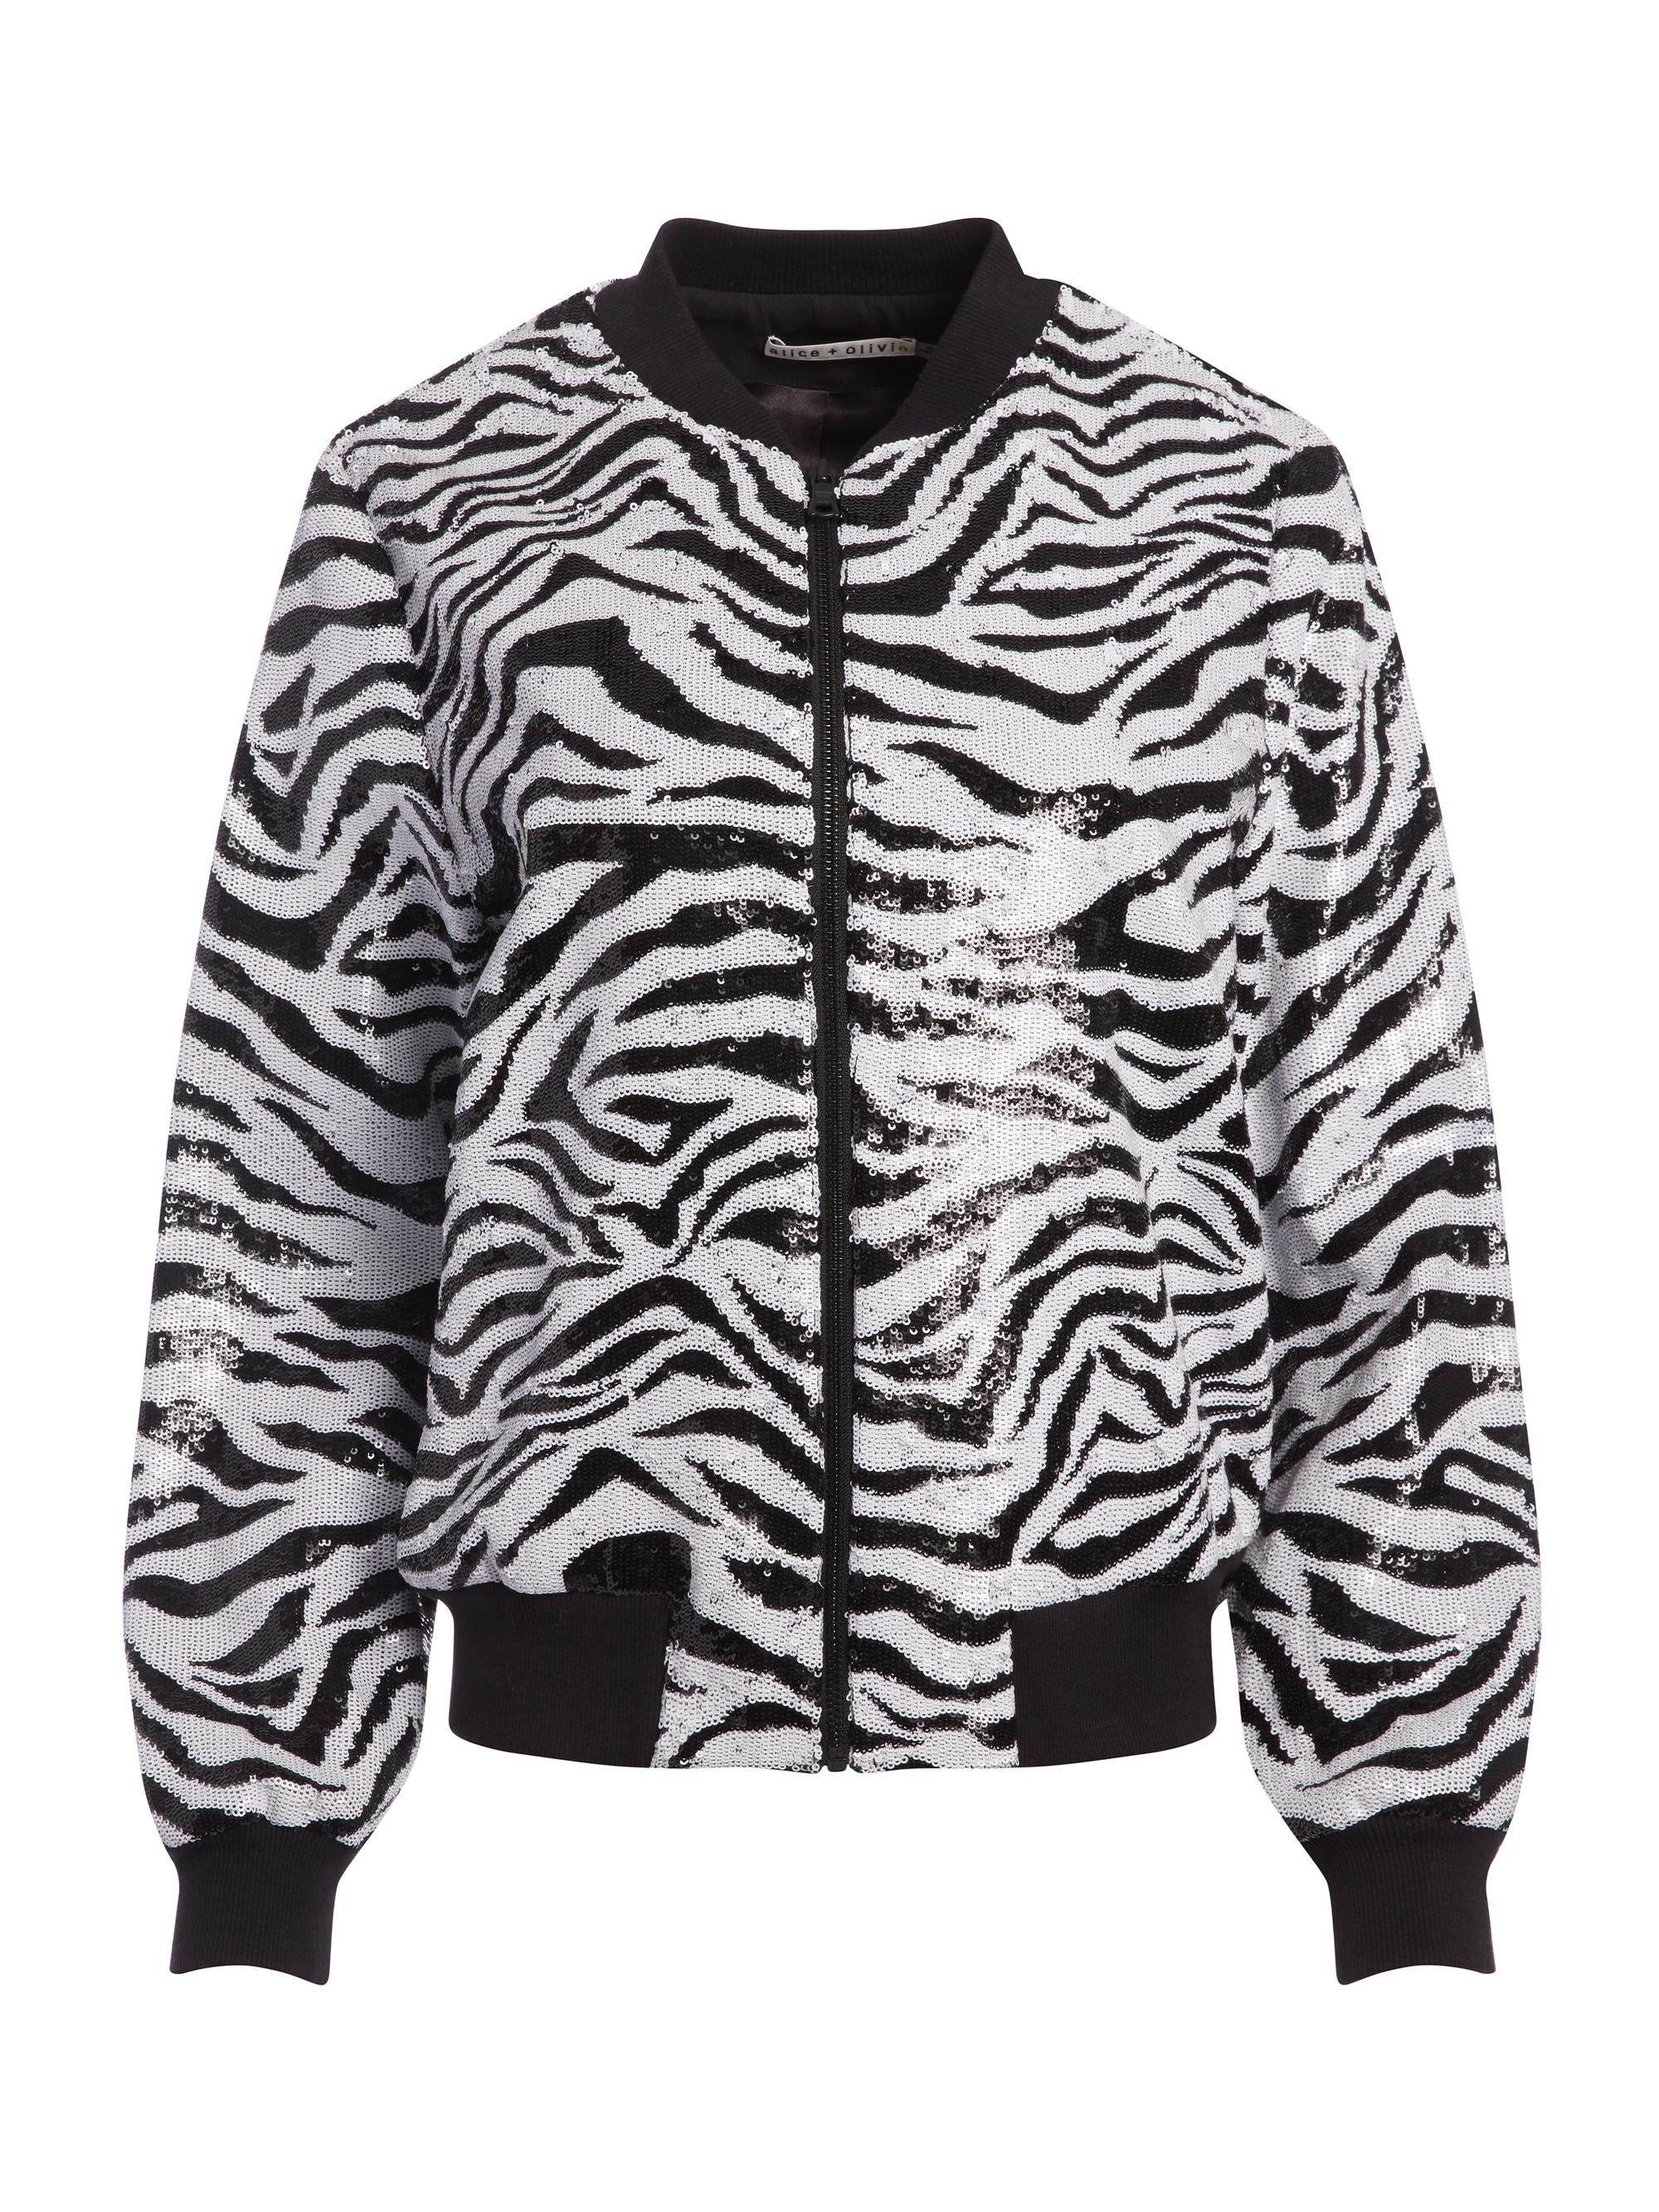 Alice + Olivia Synthetic Lonnie Zebra Sequin Bomber Jacket in Soft ...